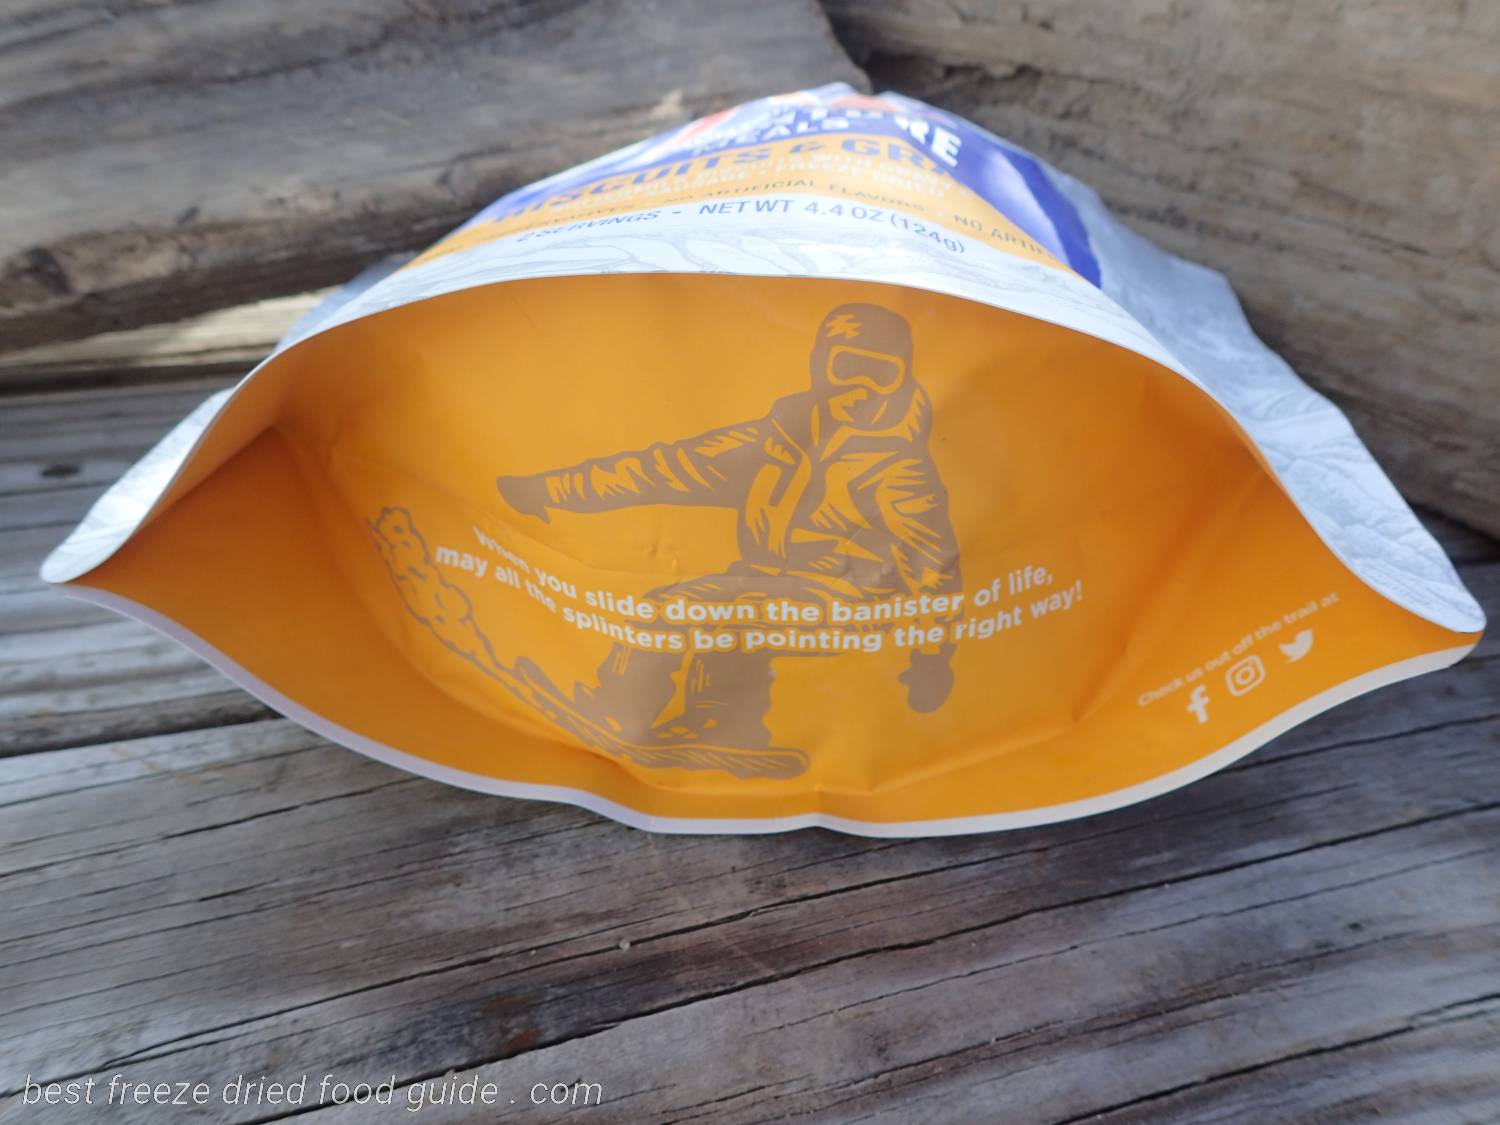 Mountain House freeze dried food pouch bowl bottom